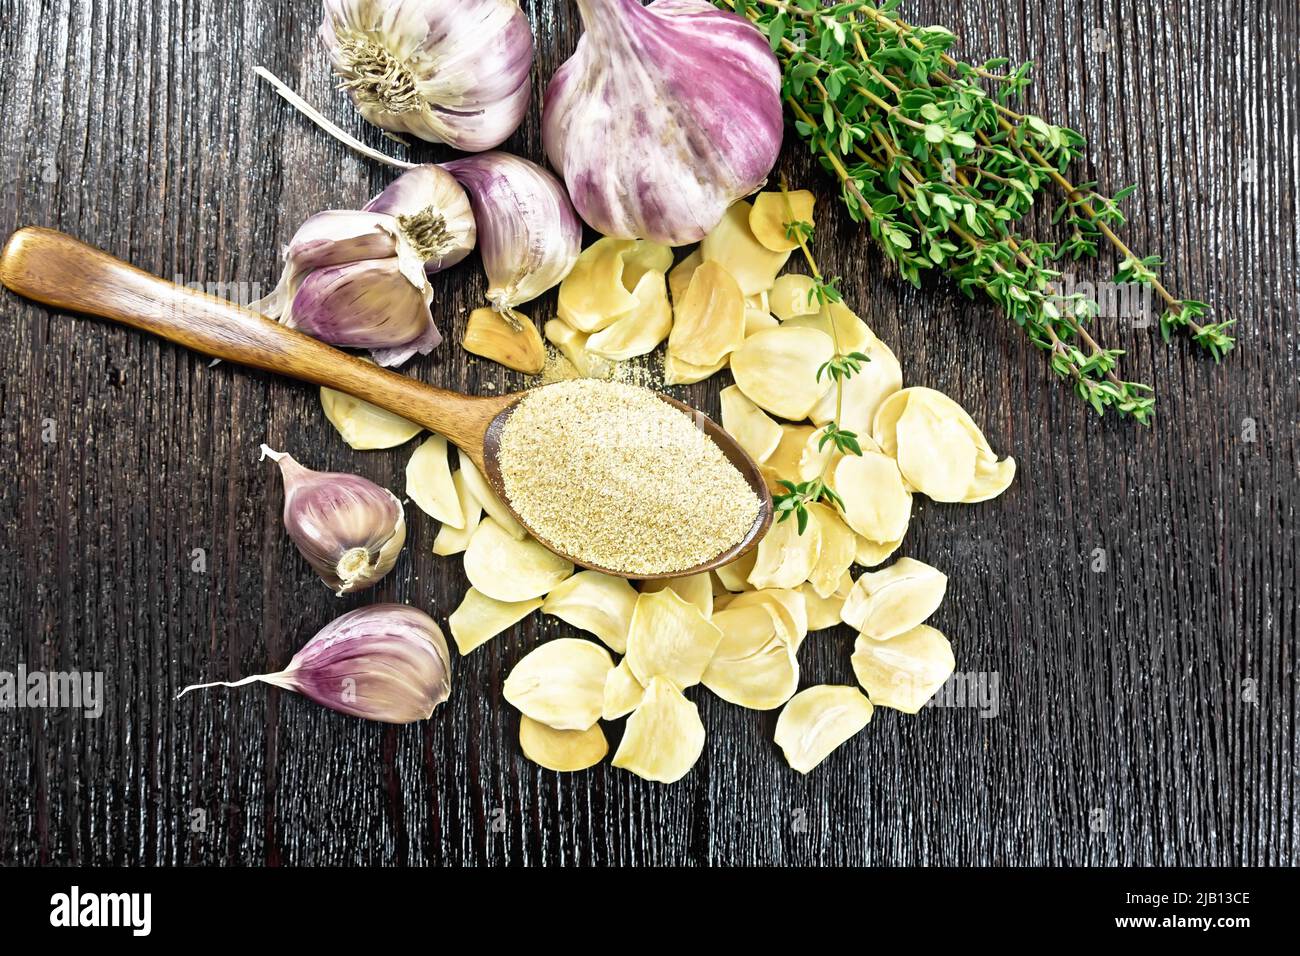 Ground garlic in a spoon, dried and fresh garlic, bunch of thyme on wooden board background from above Stock Photo